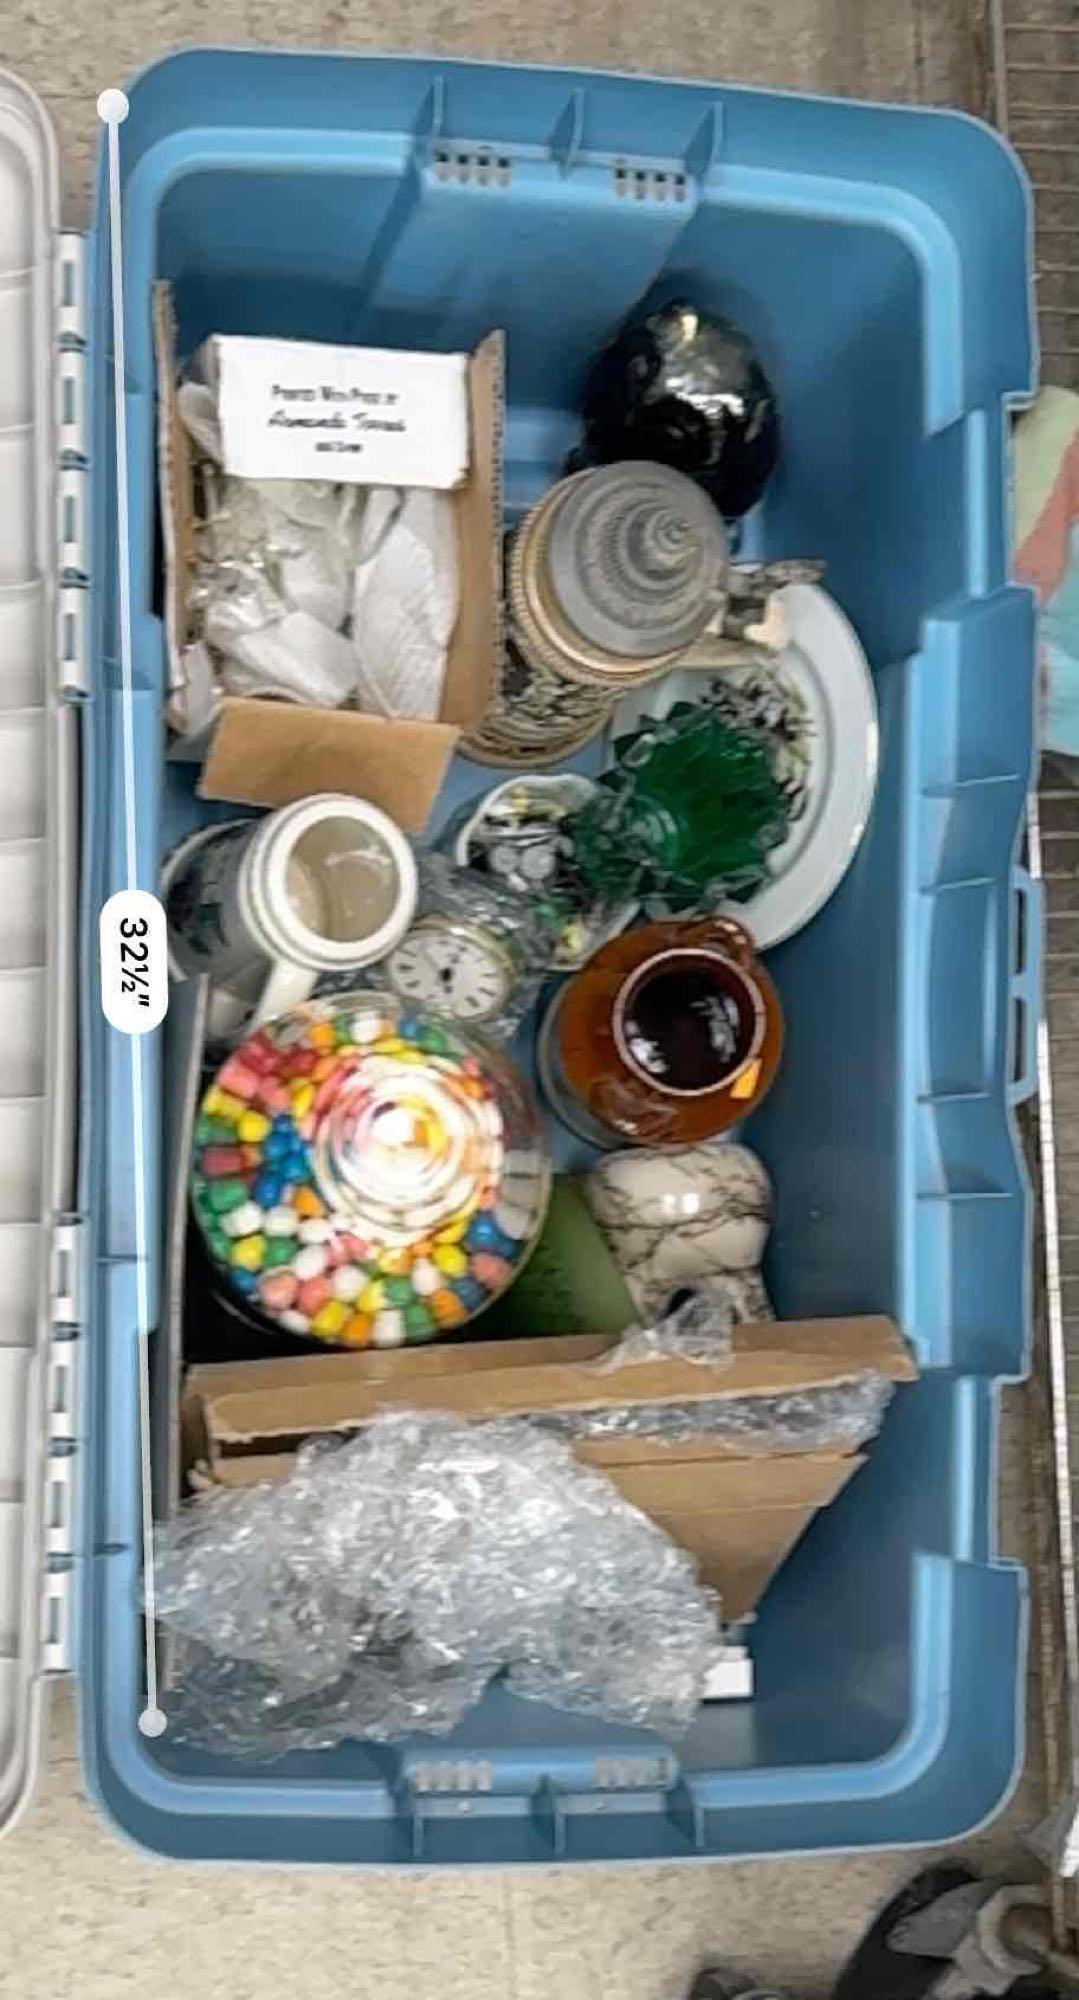 Large Bin Full of Glassware and decor. Gumball Machine, Large Stein more